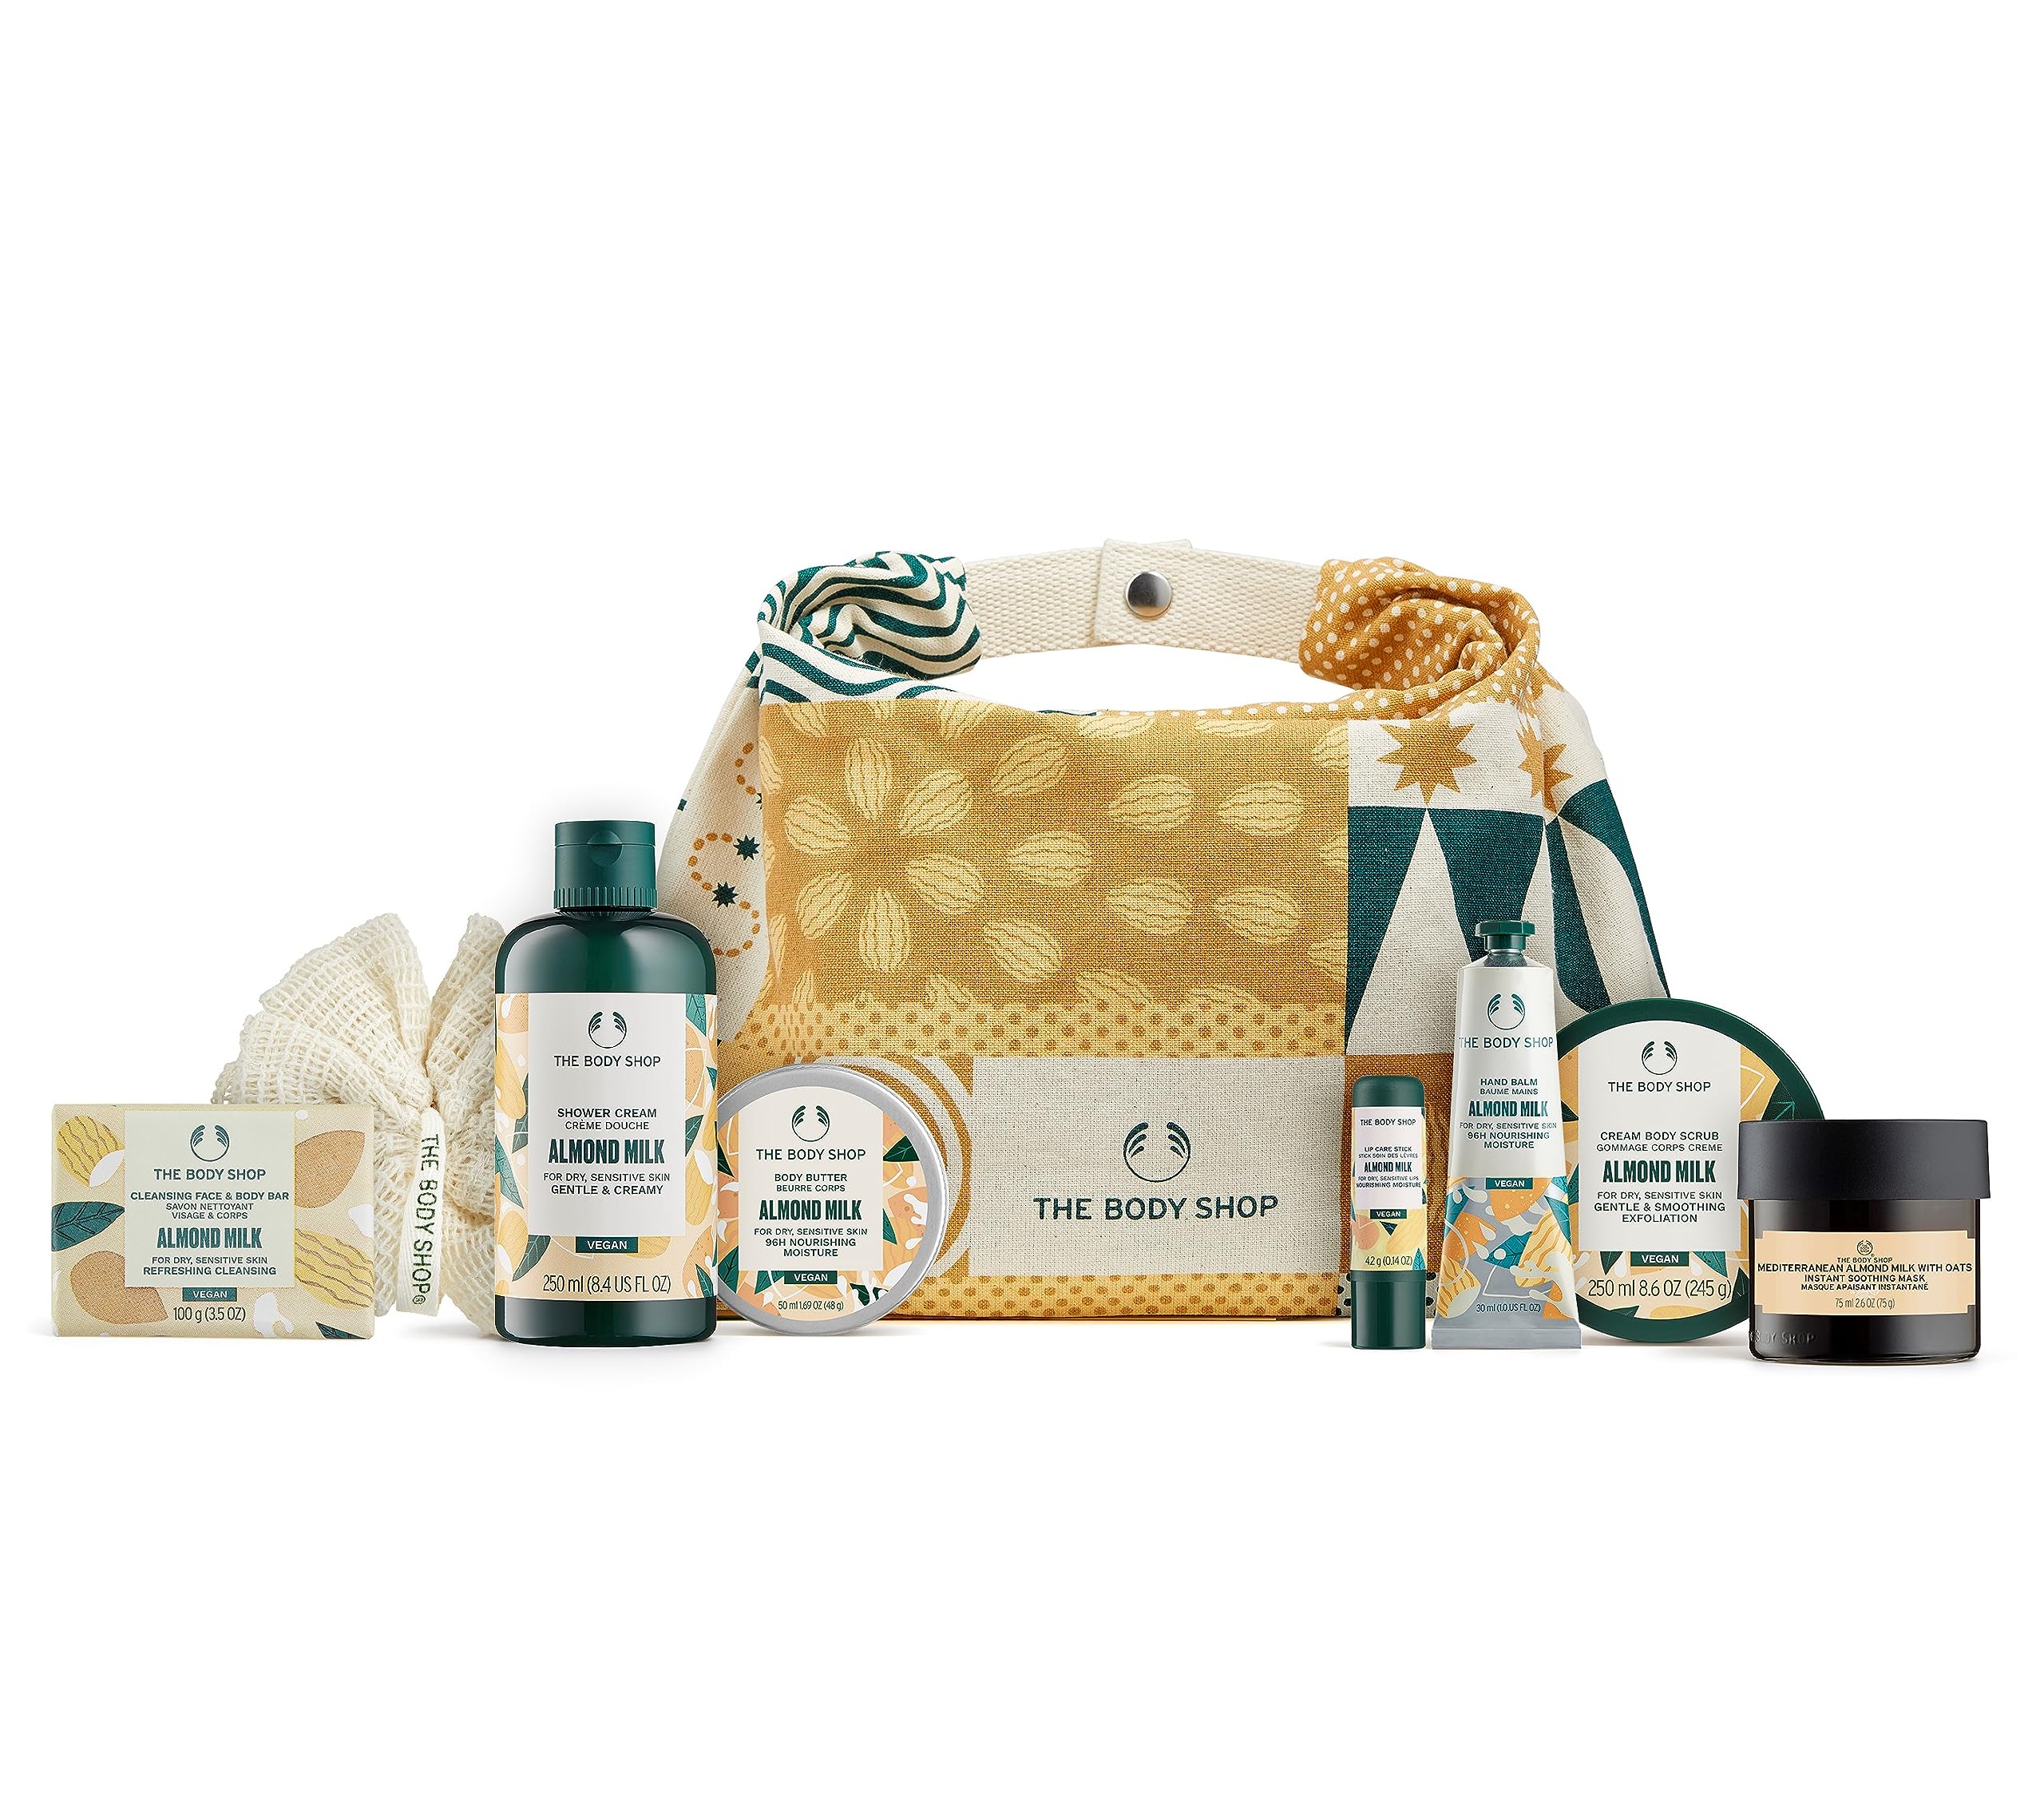 8-Piece The Body Shop Soothe & Smooth Almond Milk Ultimate Body Care Holiday Gift Set $38 + Free Shipping